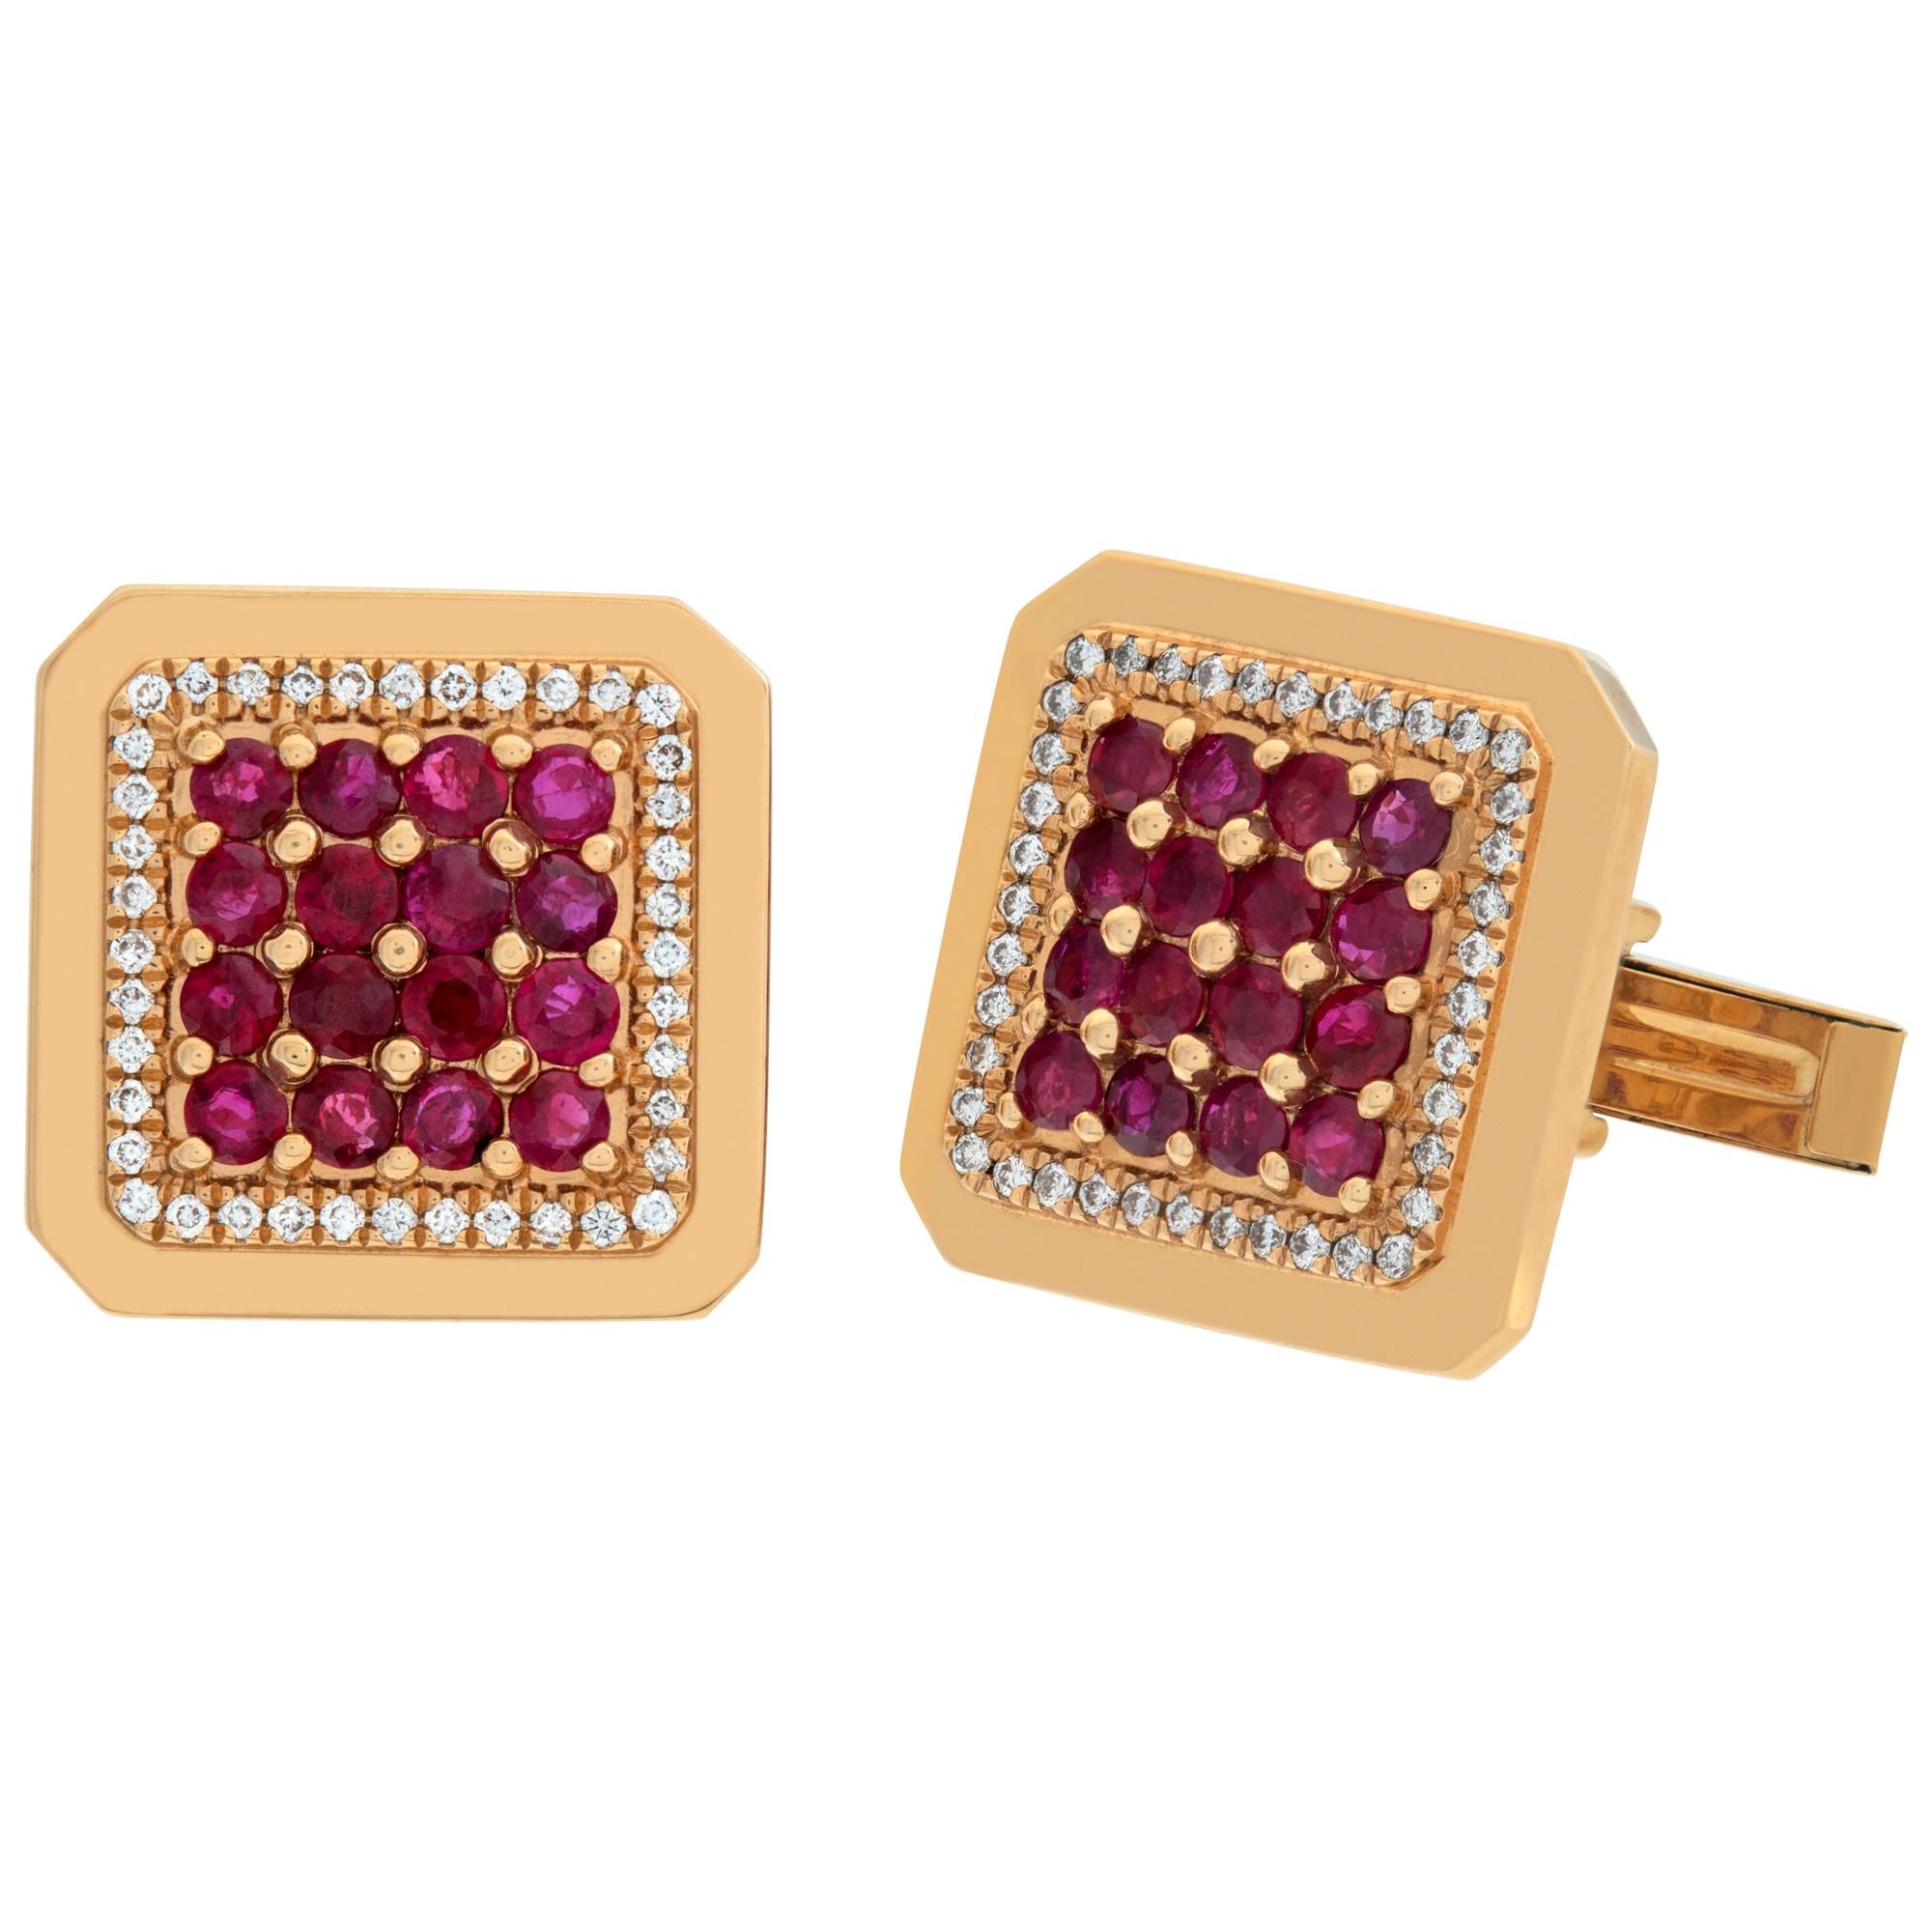 Ruby & diamonds square cufflinks, set in 18k yellow gold. Total round cut ruby approx. weight: 3.20 carats. Round brilliant cut diamonds total approx. weight: 0.40 carat, white & eye clean. Width: 17.8mm x 17.8mm.
